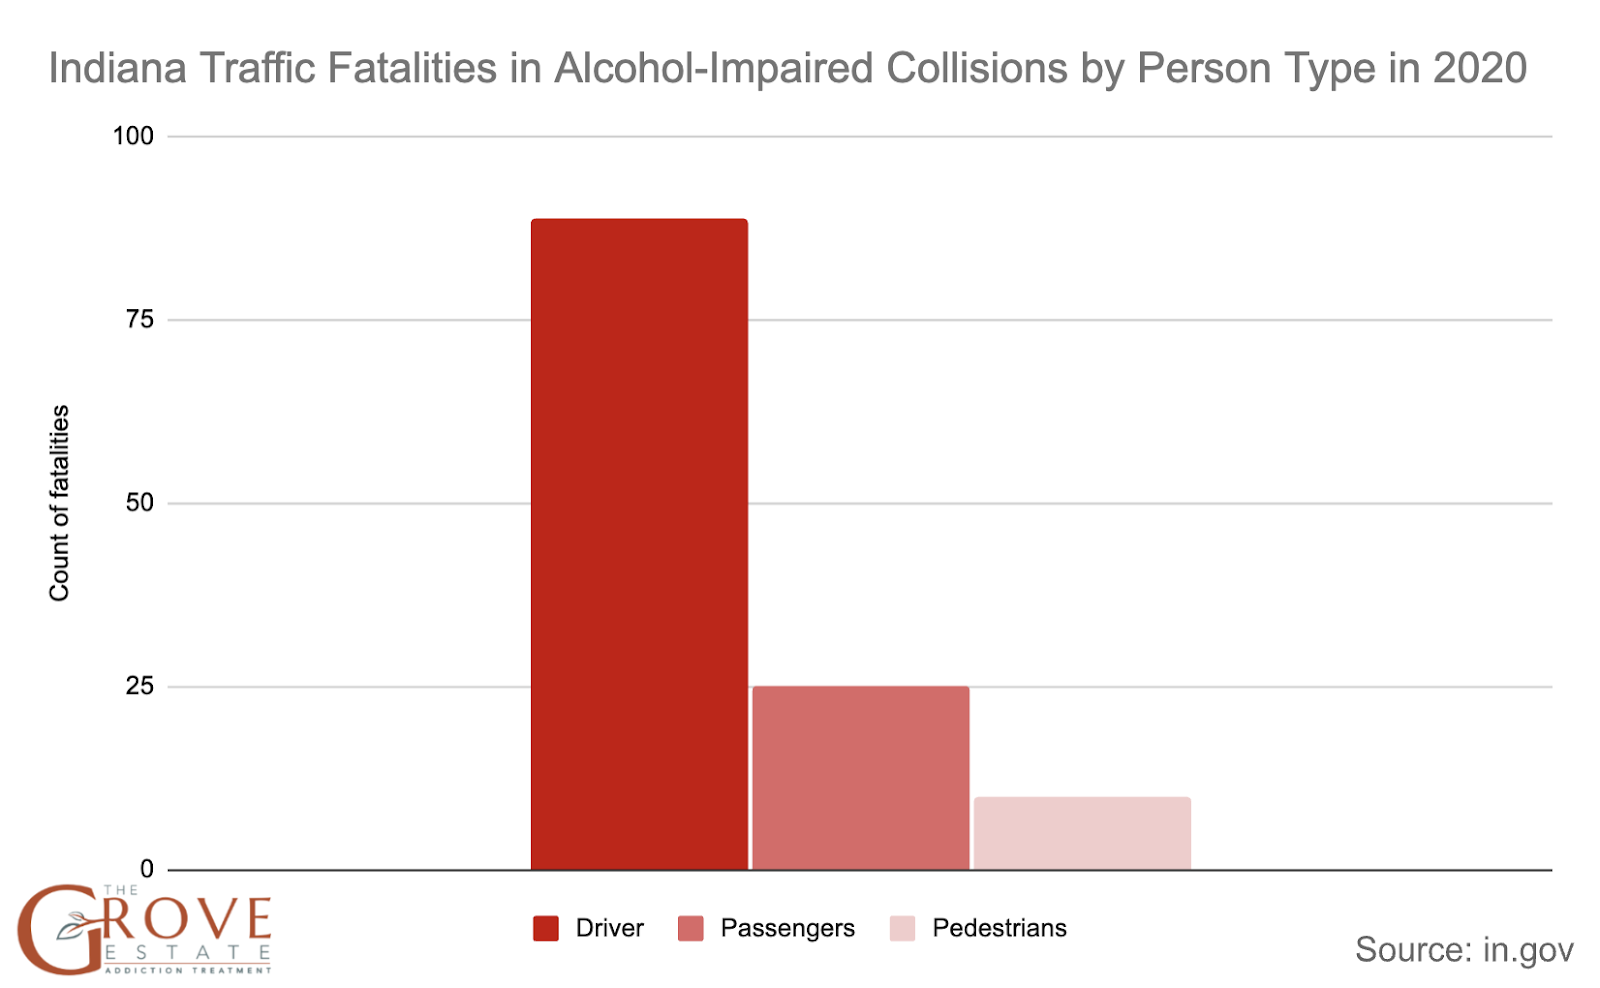 Alcohol-Impaired Fatalities in Indiana by Person Type